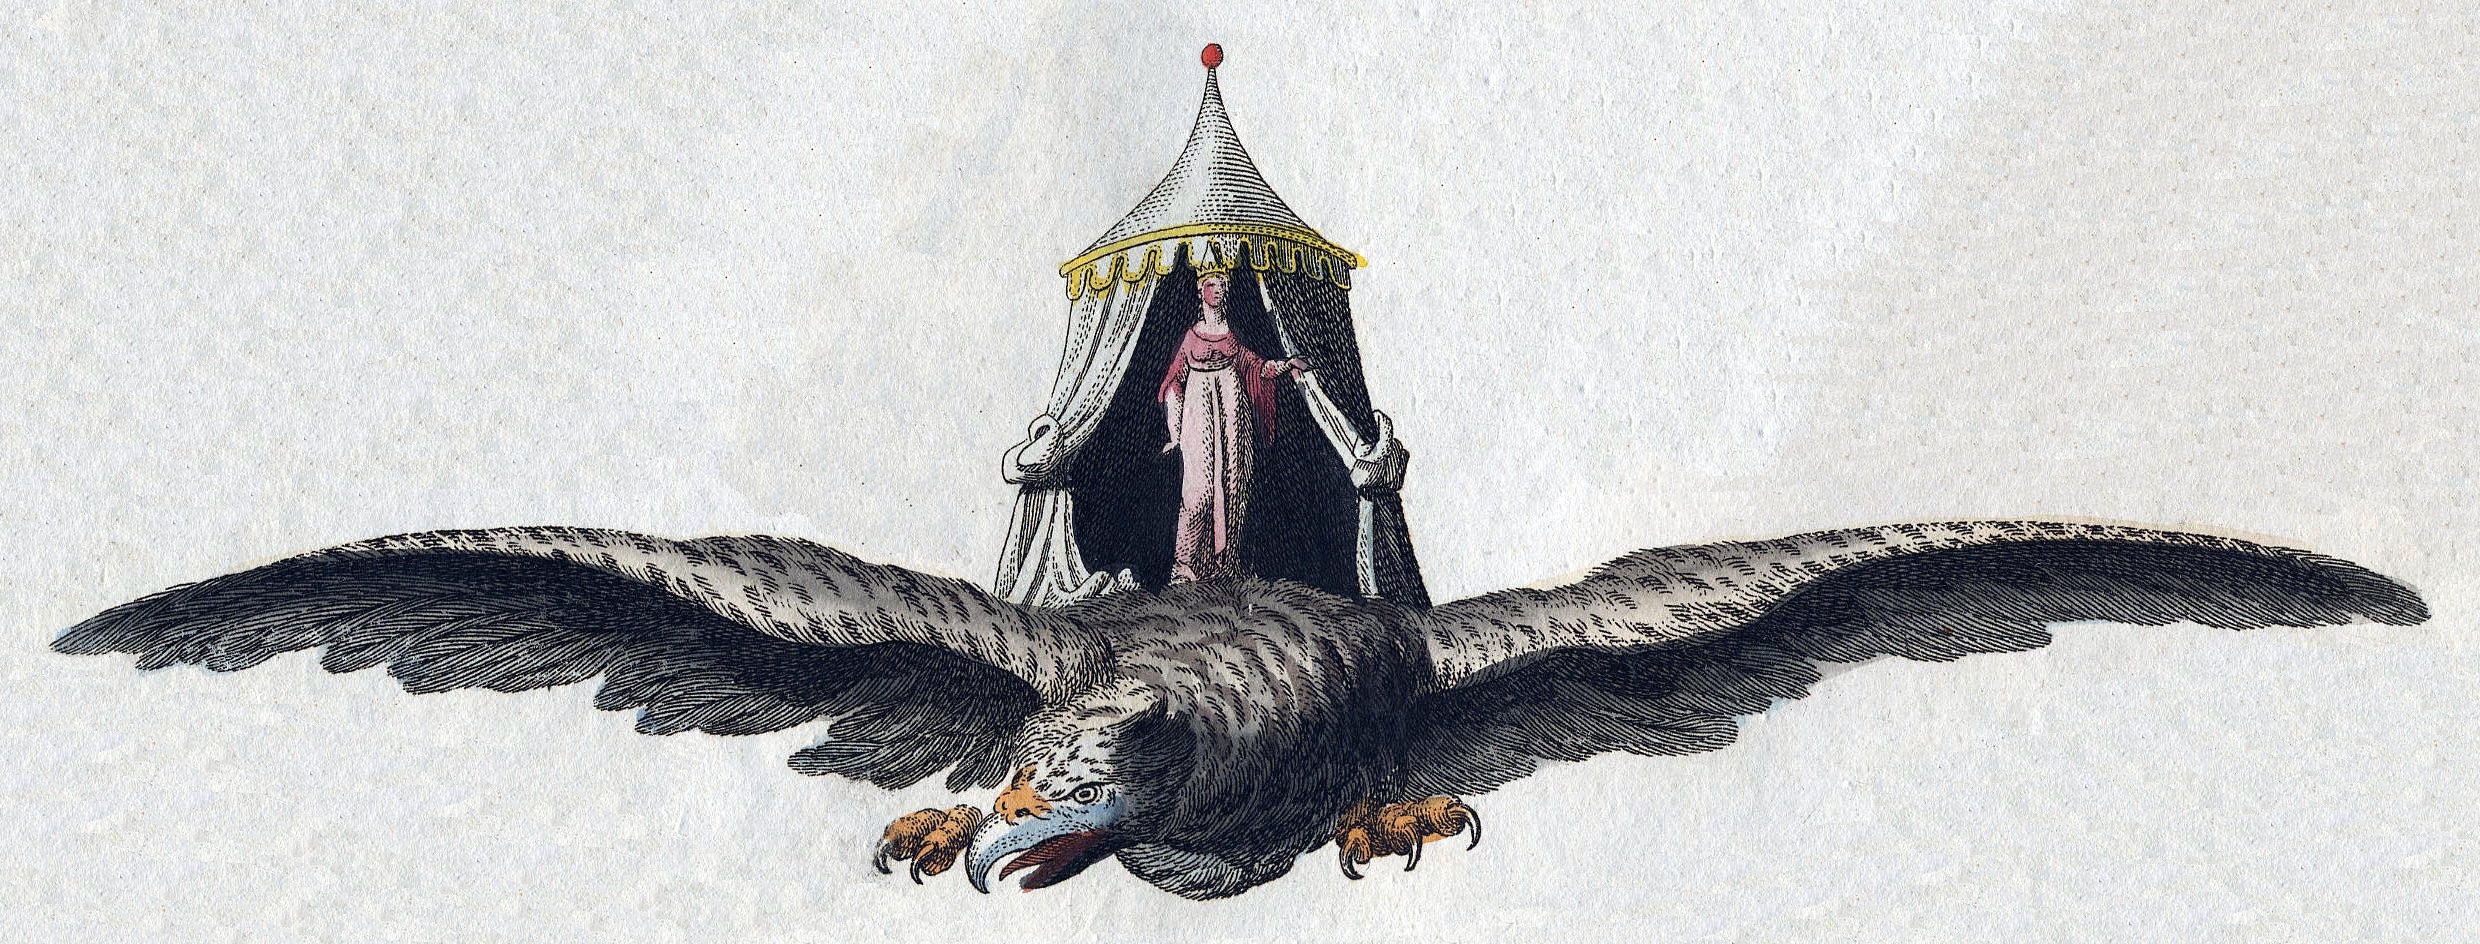 A figure stands inside a tent with open curtains which rests upon a large bird.